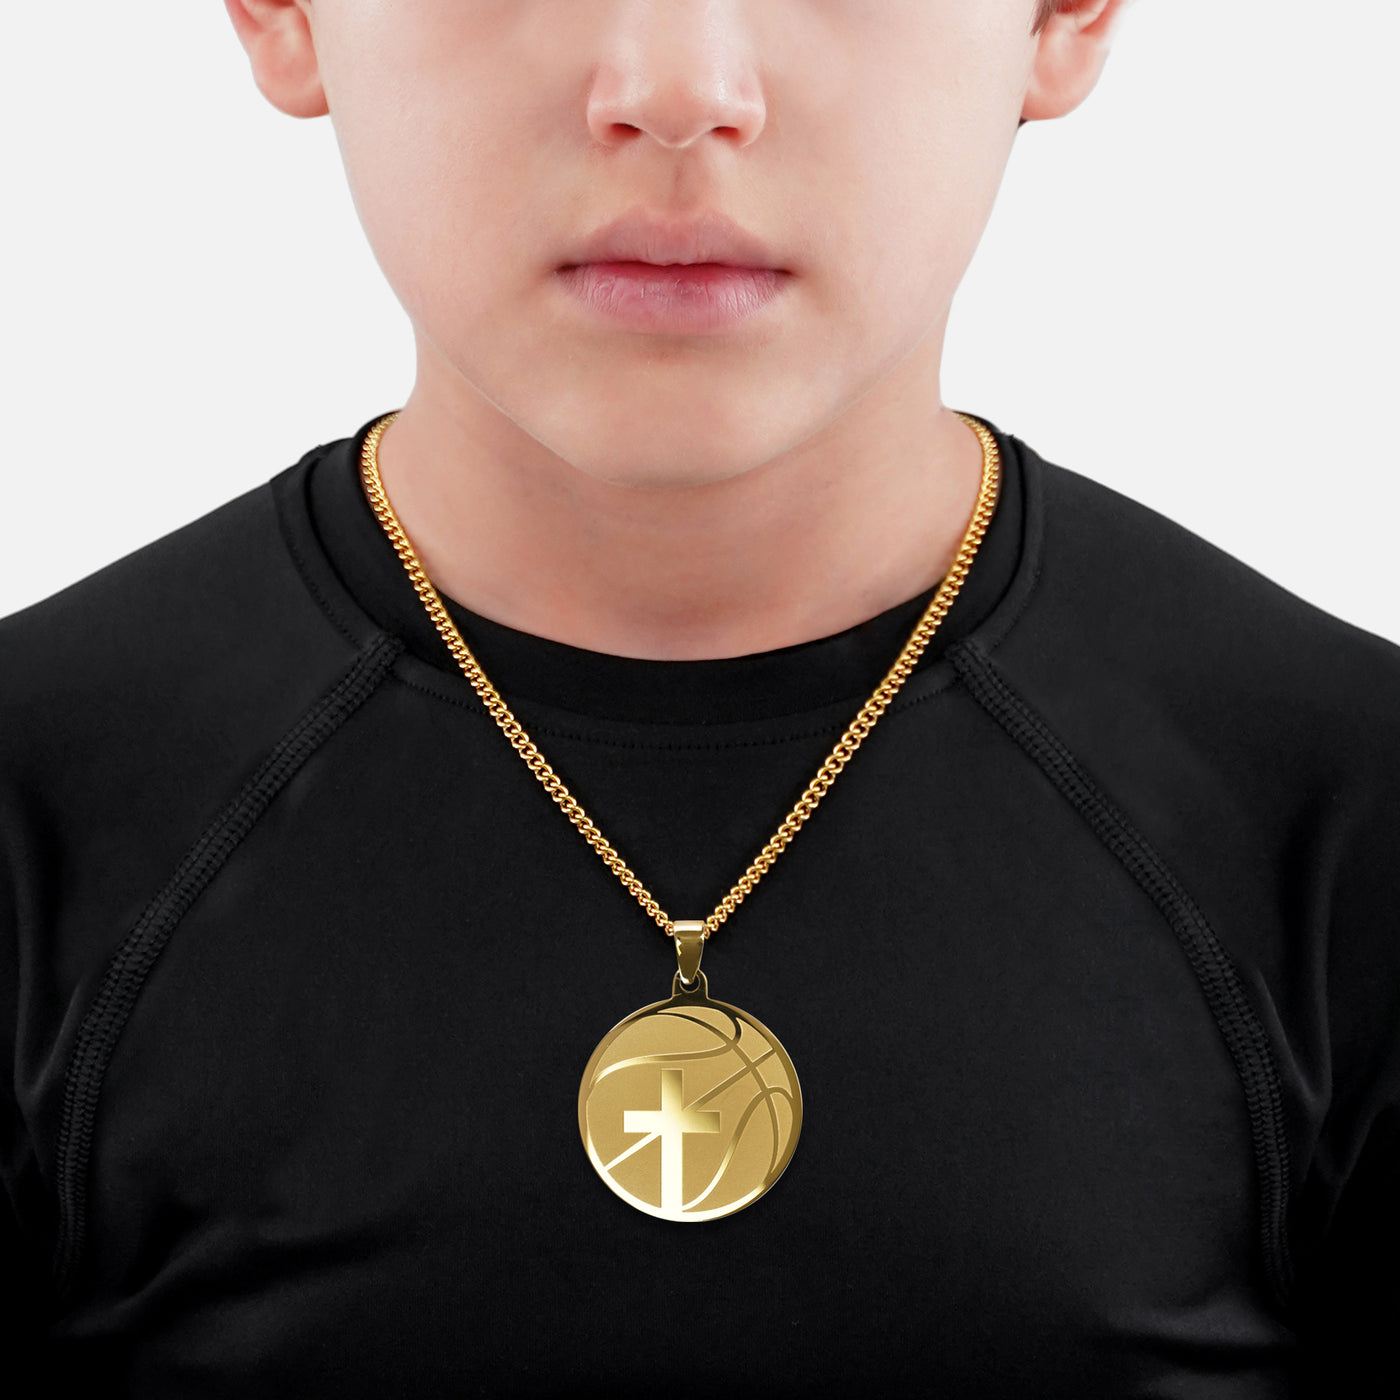 Basketball Faith Cross Pendant with Chain Kids Necklace - Gold Plated Stainless Steel